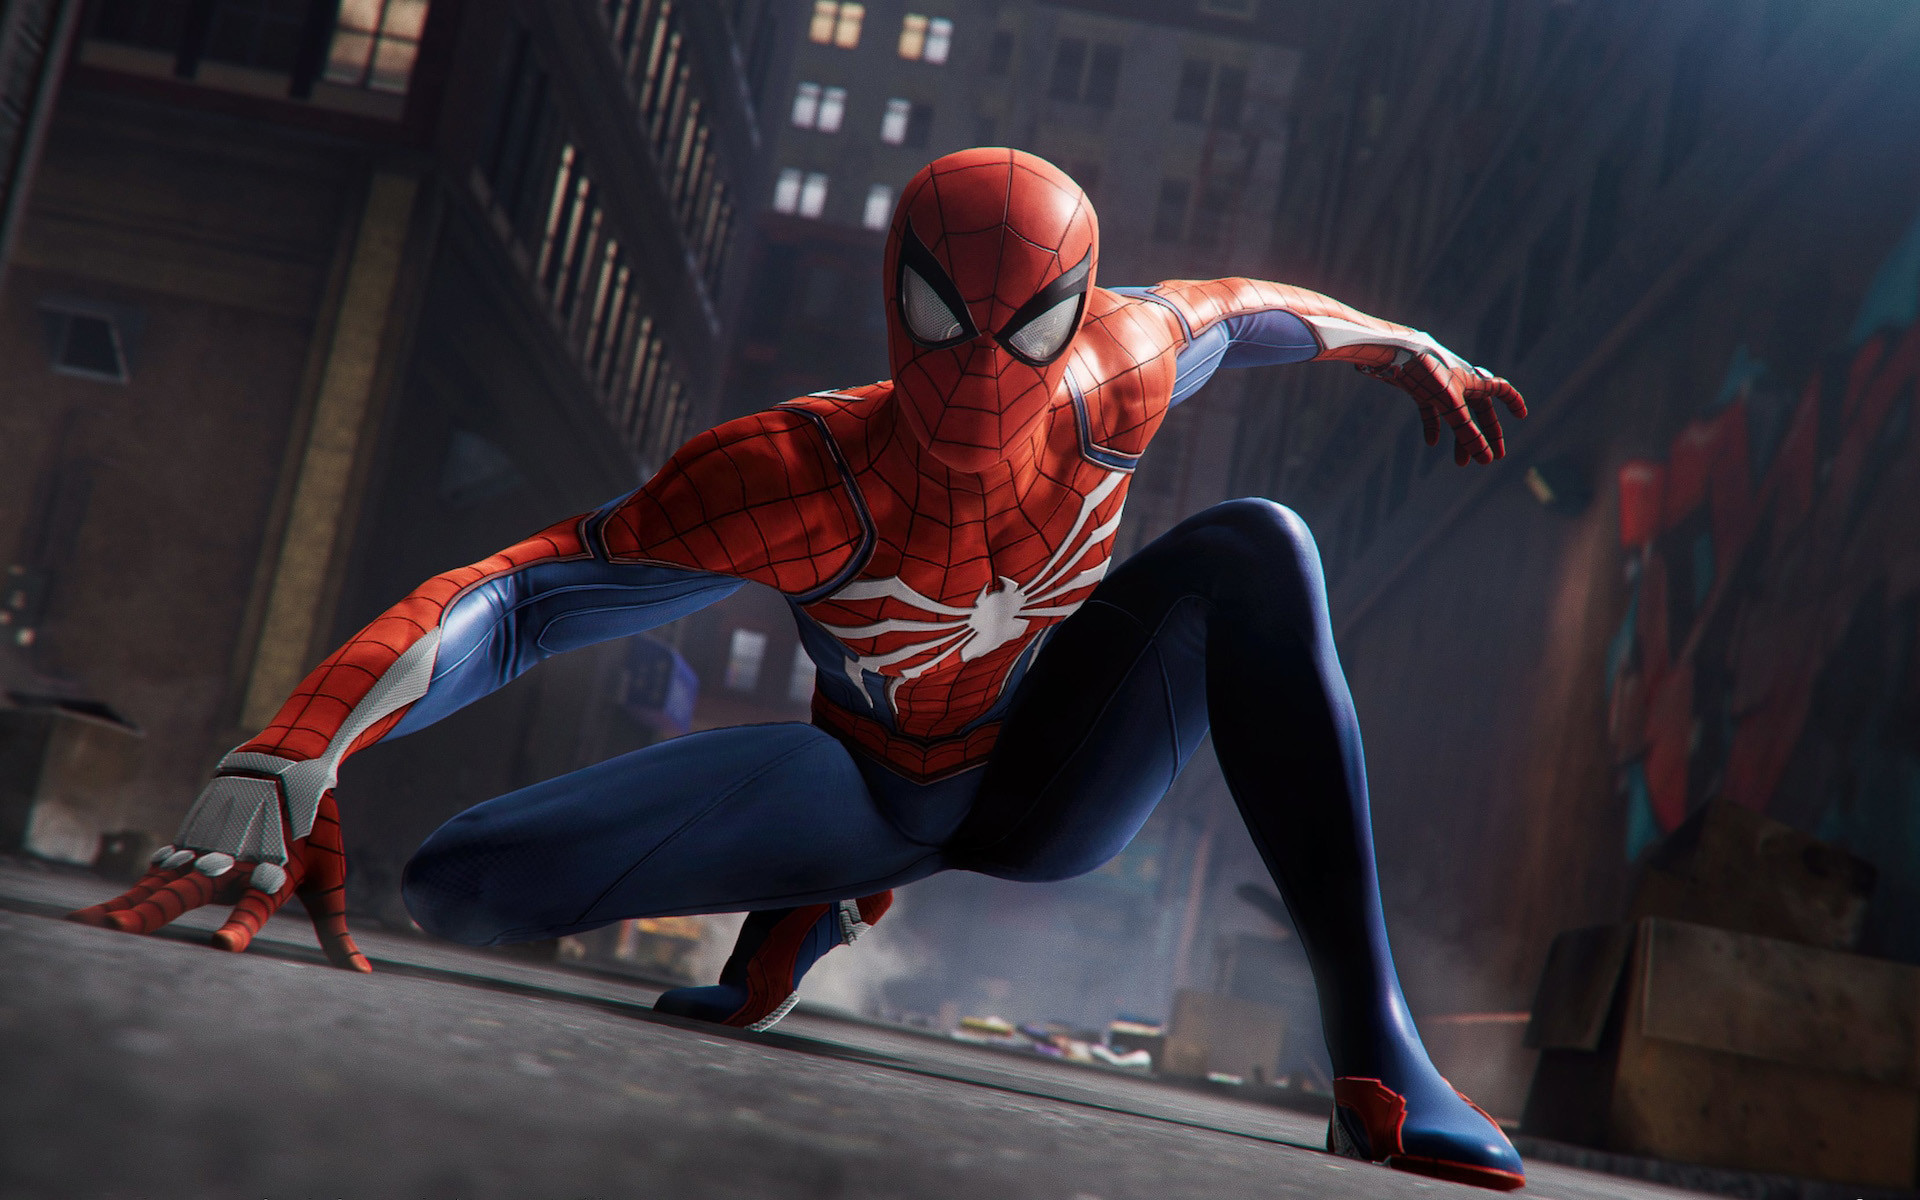 You are viewing the image with filename news.spider_man_ps4_crouch.jpg.